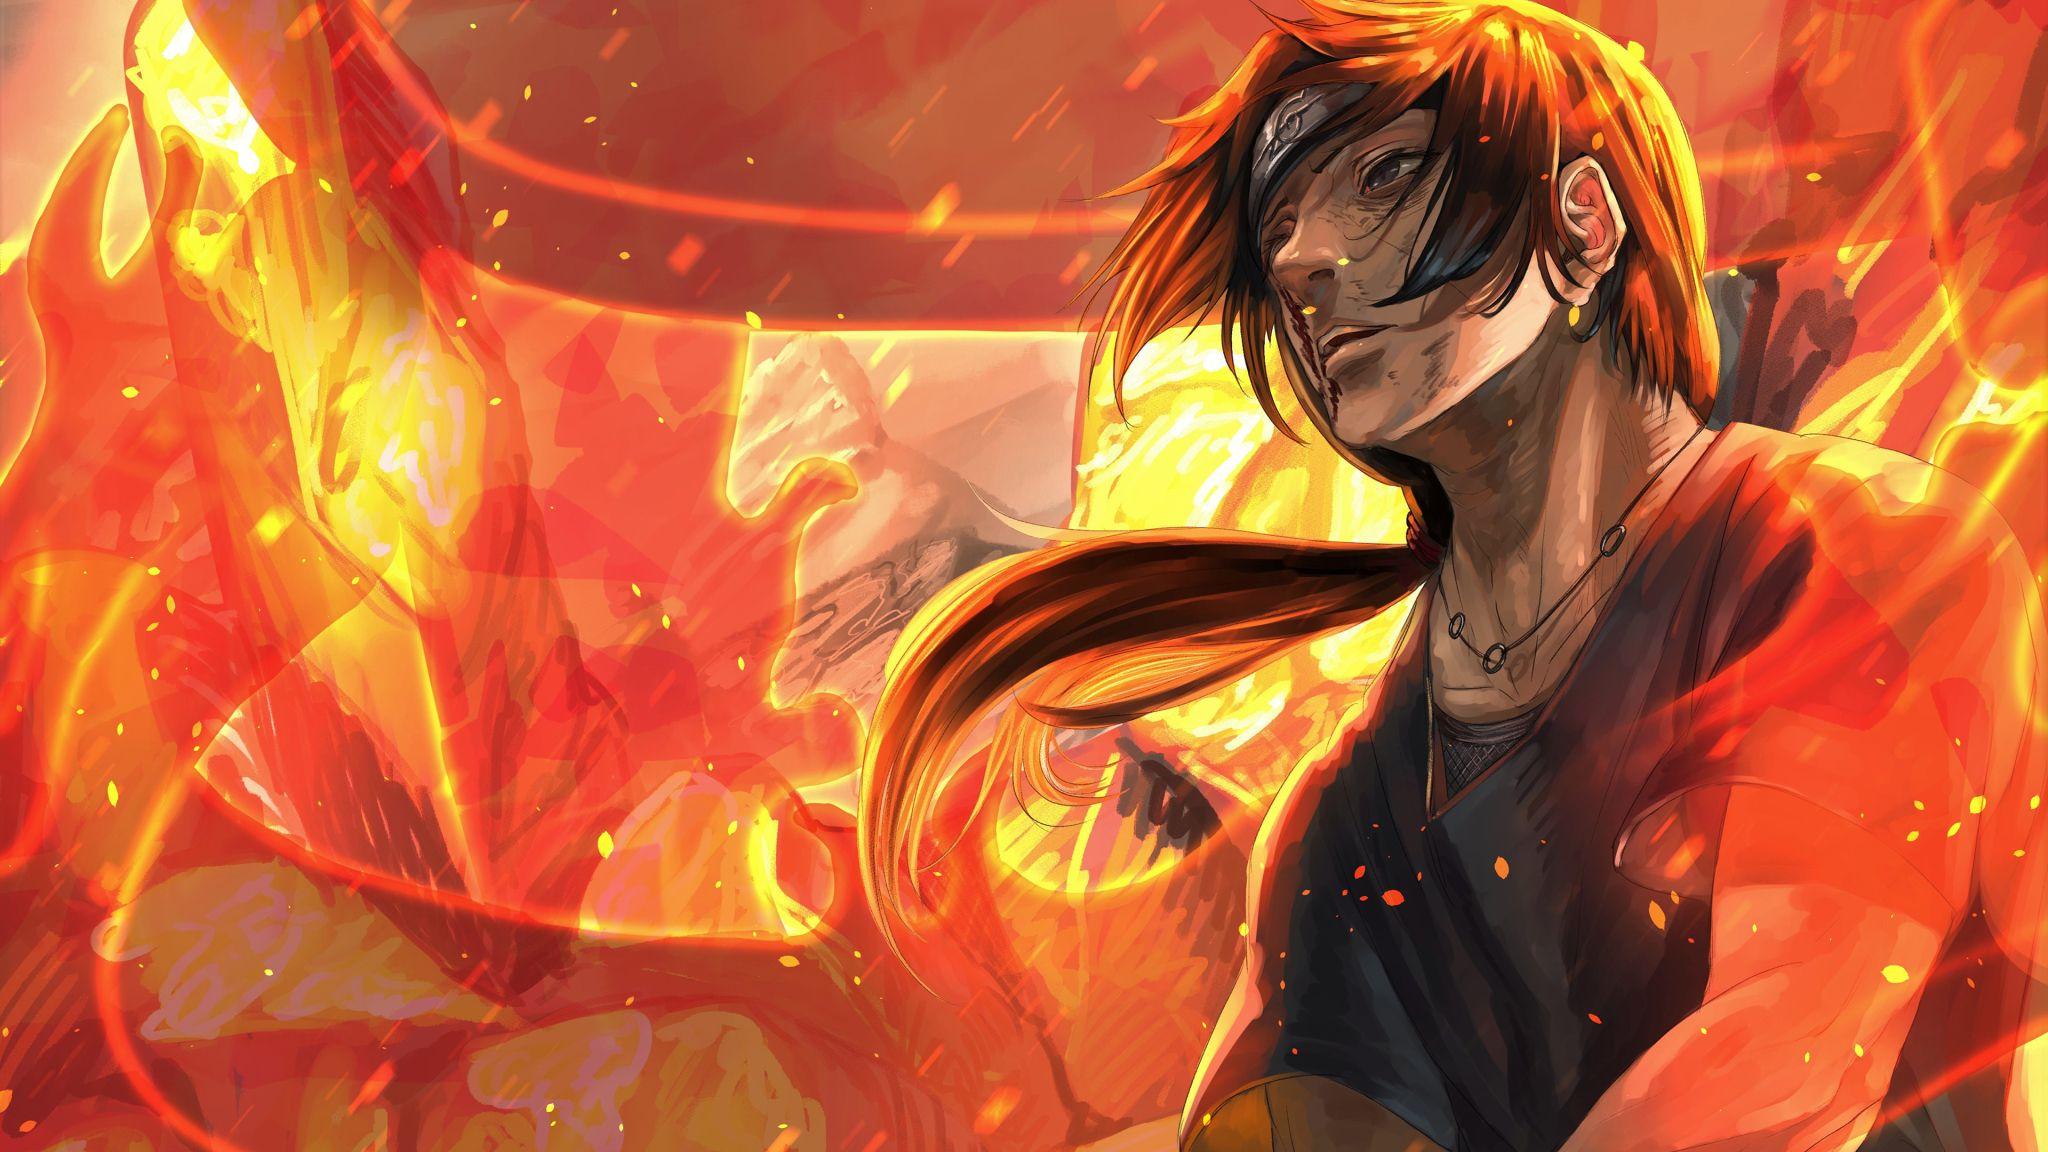 Anime fire wallpaper by Passion2edit - Download on ZEDGE™